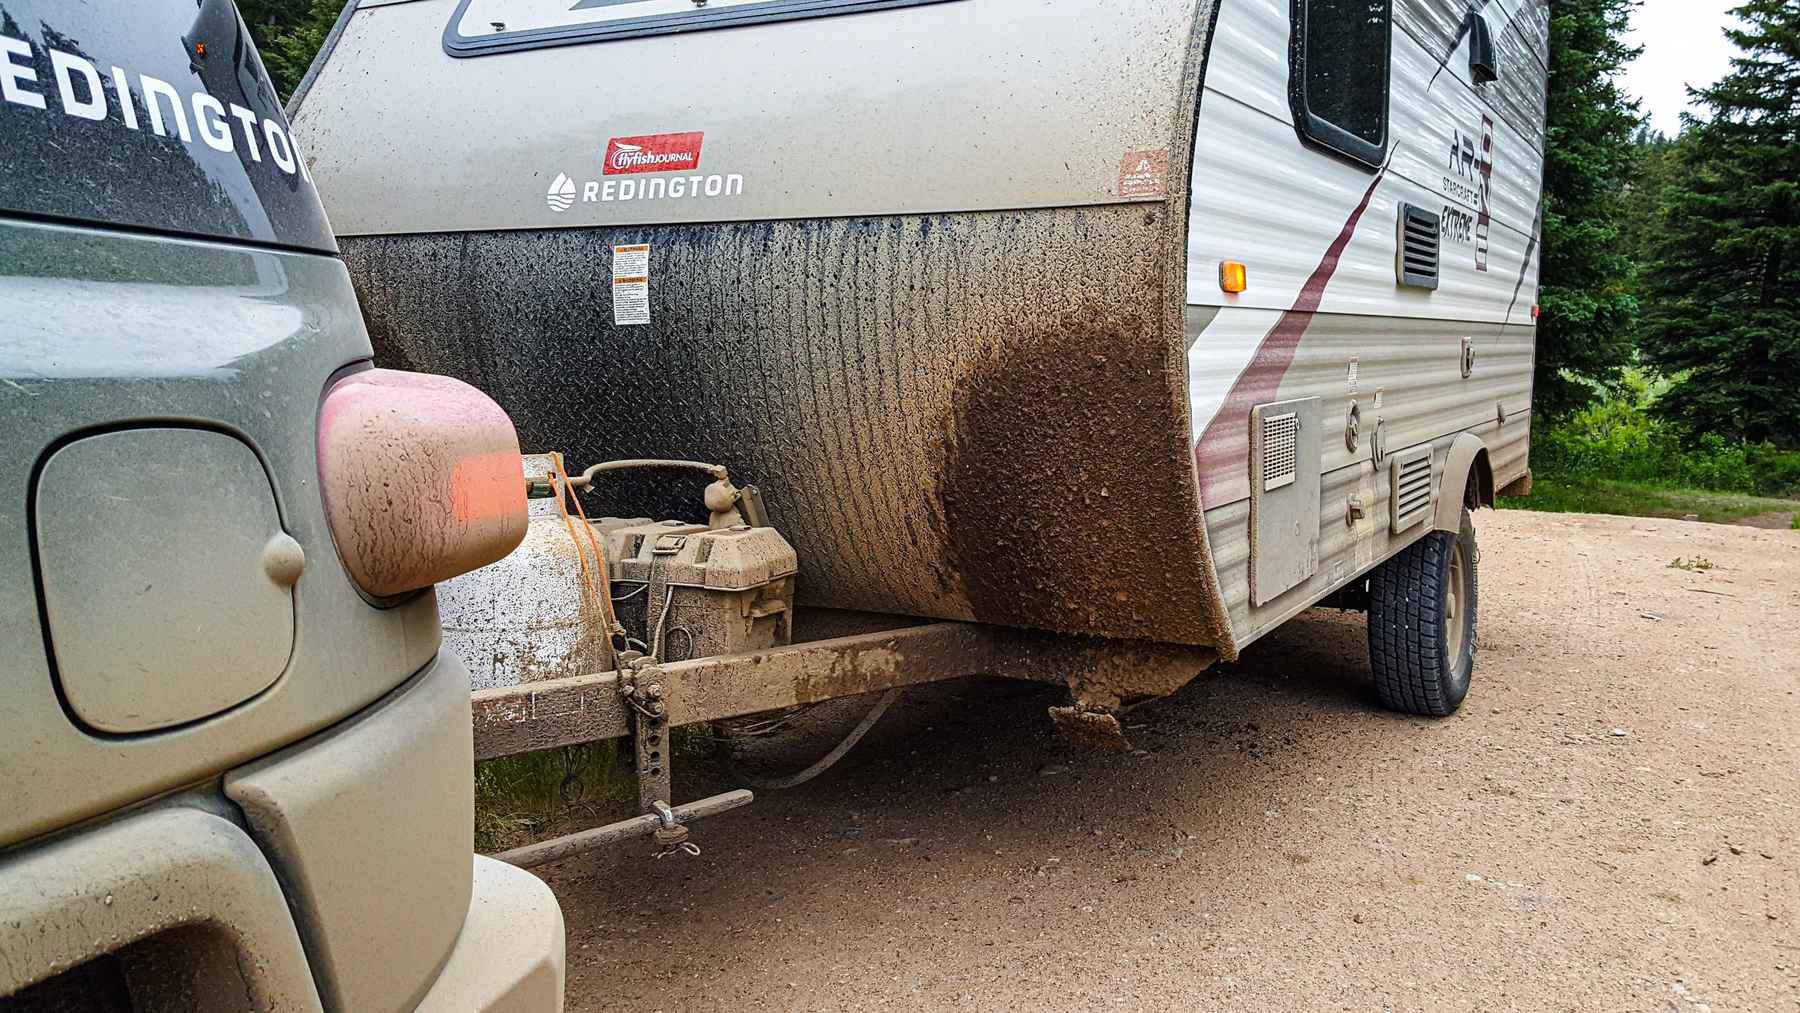 Top 10 Tips for Keeping your Camper Organized - RV World MN Blog